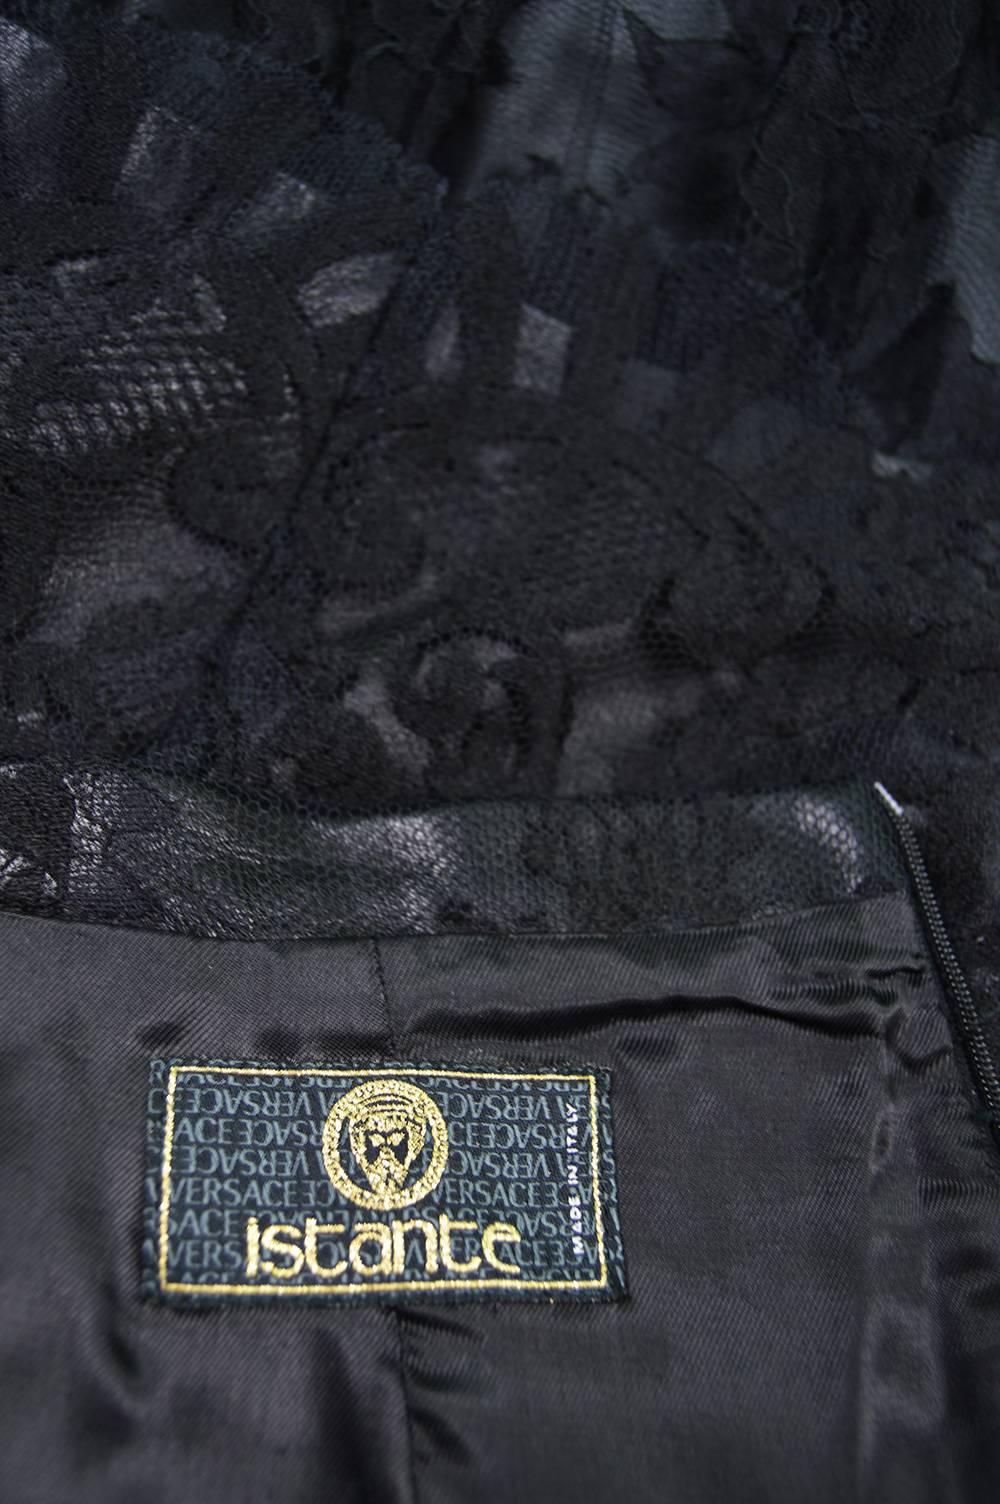 Versace Istante Vintage Leather & Lace Skirt For Sale 2